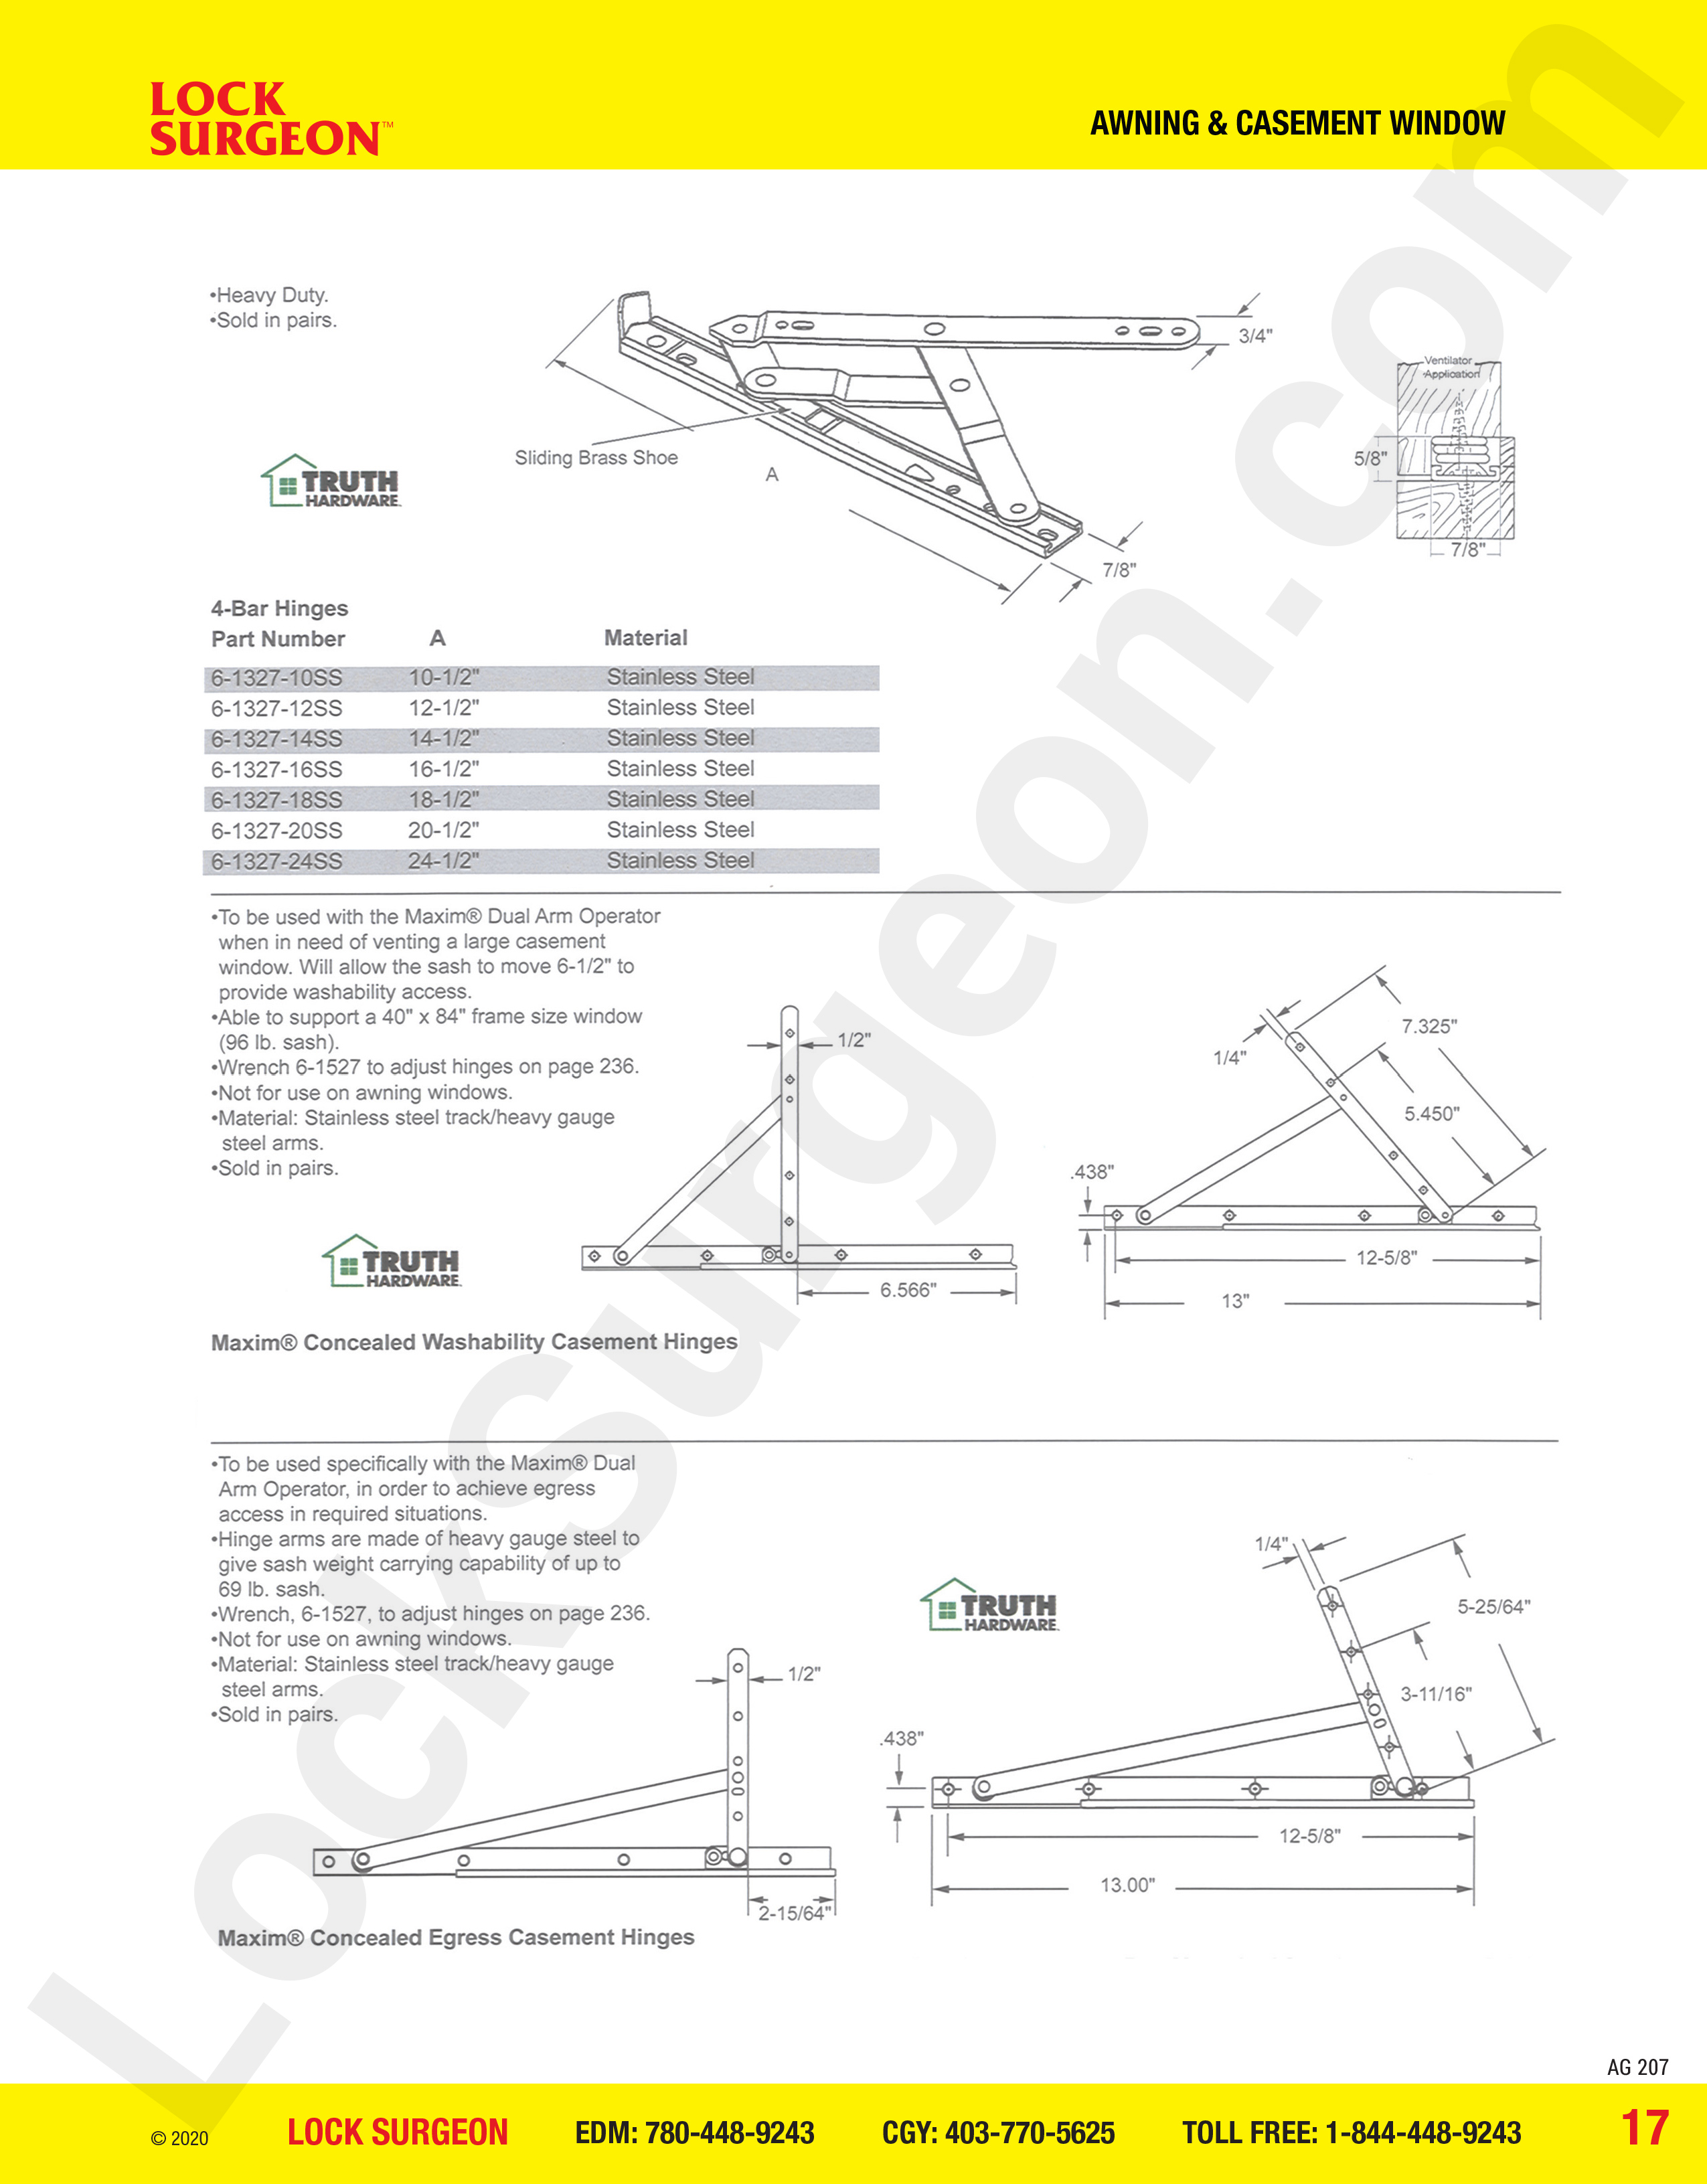 awning and casement window parts for maxim hinges.